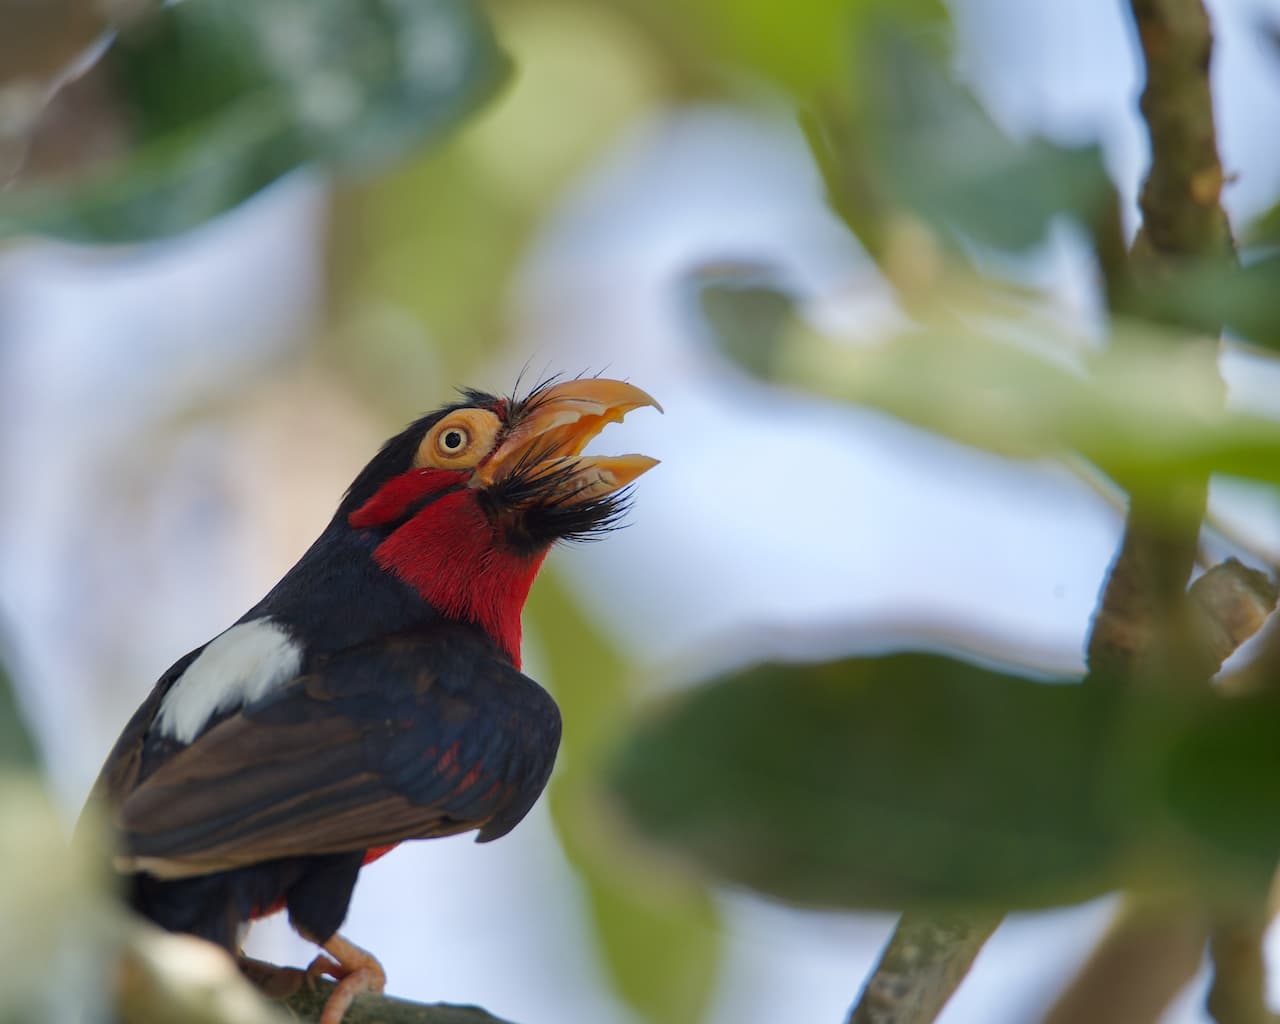 A Bearded Barbets sitting on a branch of a tree.